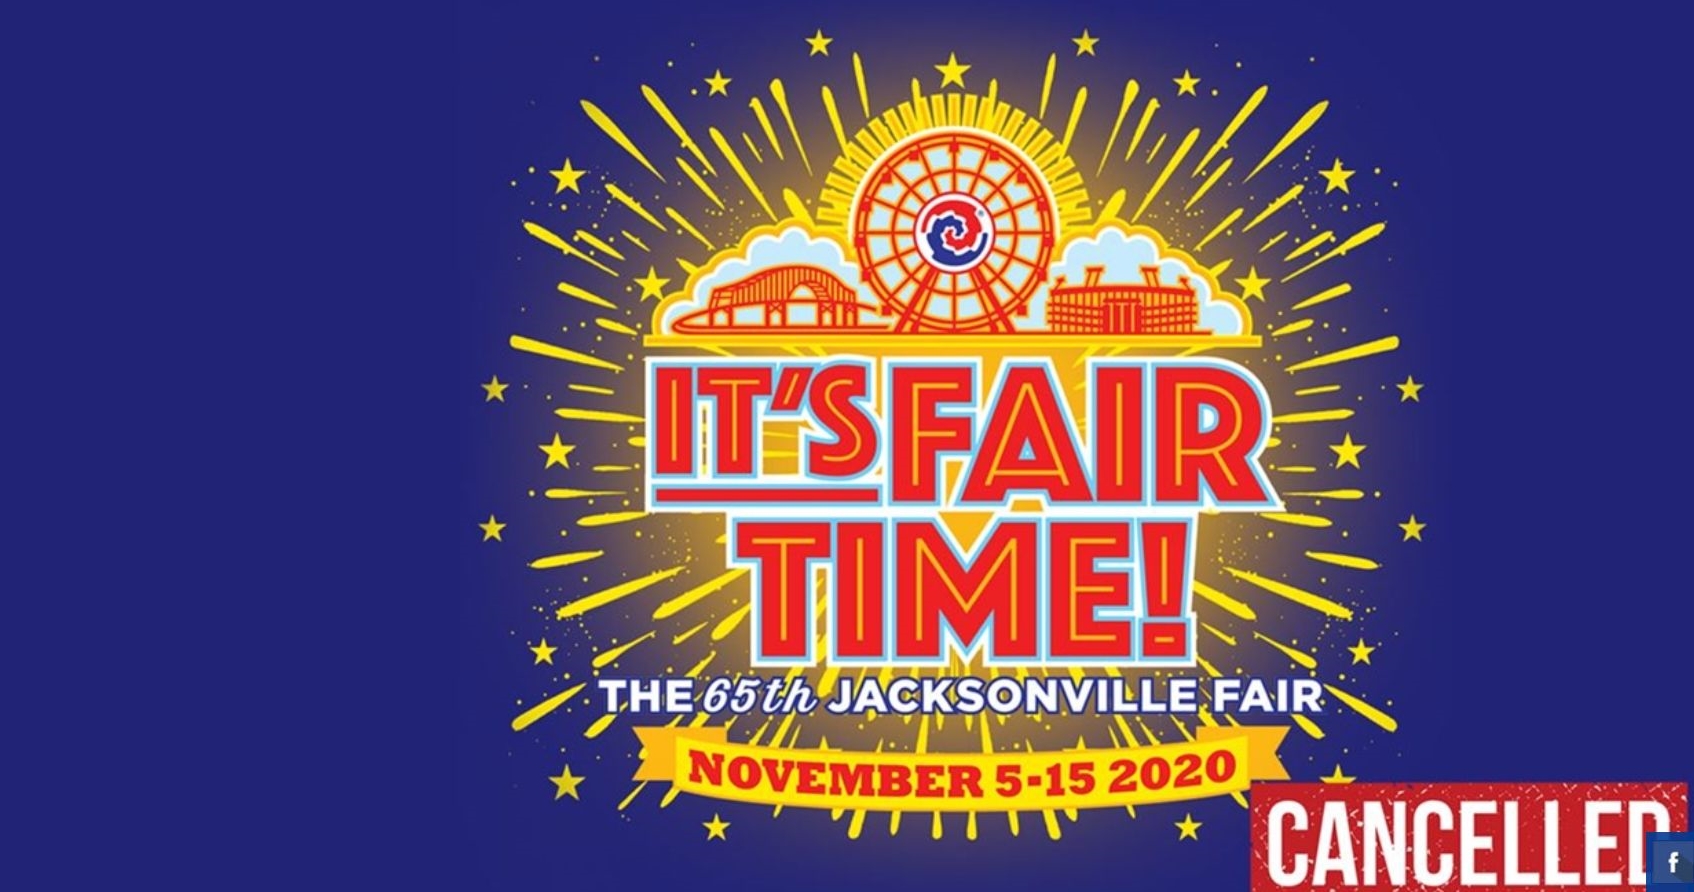 7761The 65th anniversary of the Jacksonville fair has been cancelled